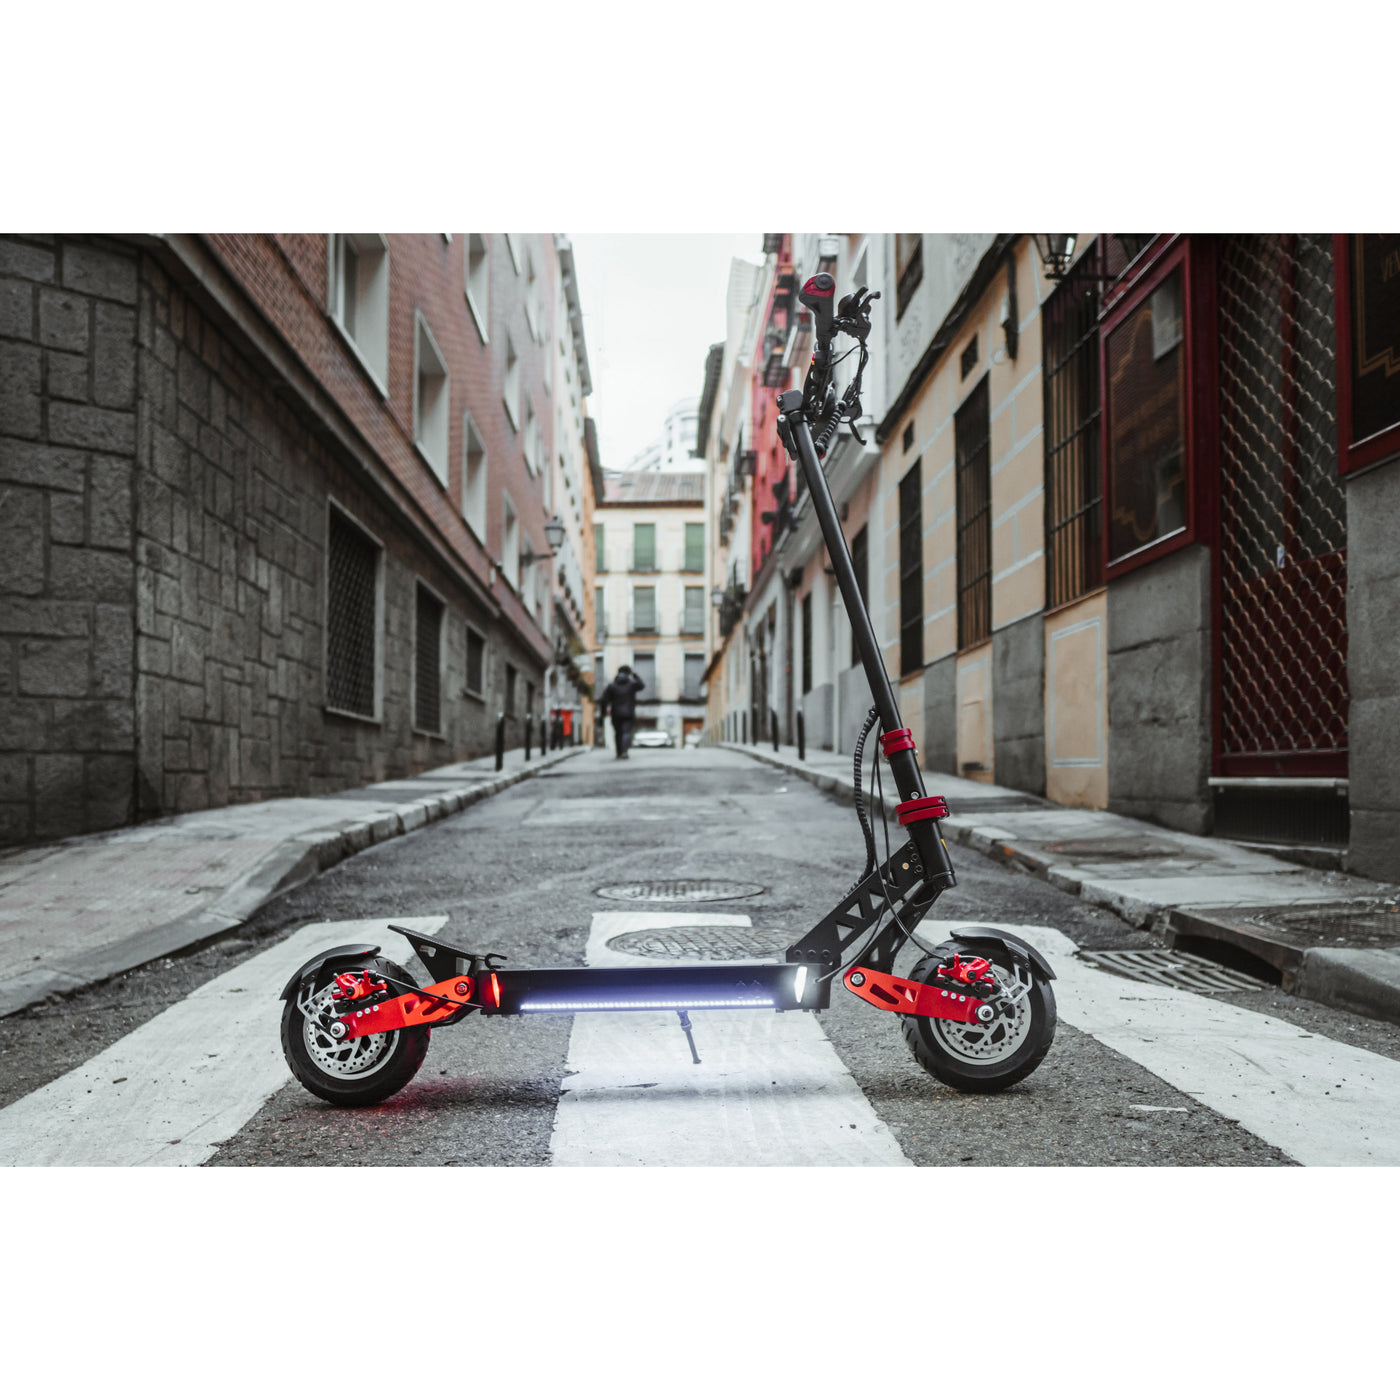 Electric Scooter VELOZ X10 PRO Dual Motor 2000W 65 KM/HR 18Ah/ 23Ah Battery 6 Months Free Service - EOzzie Electric Vehicles